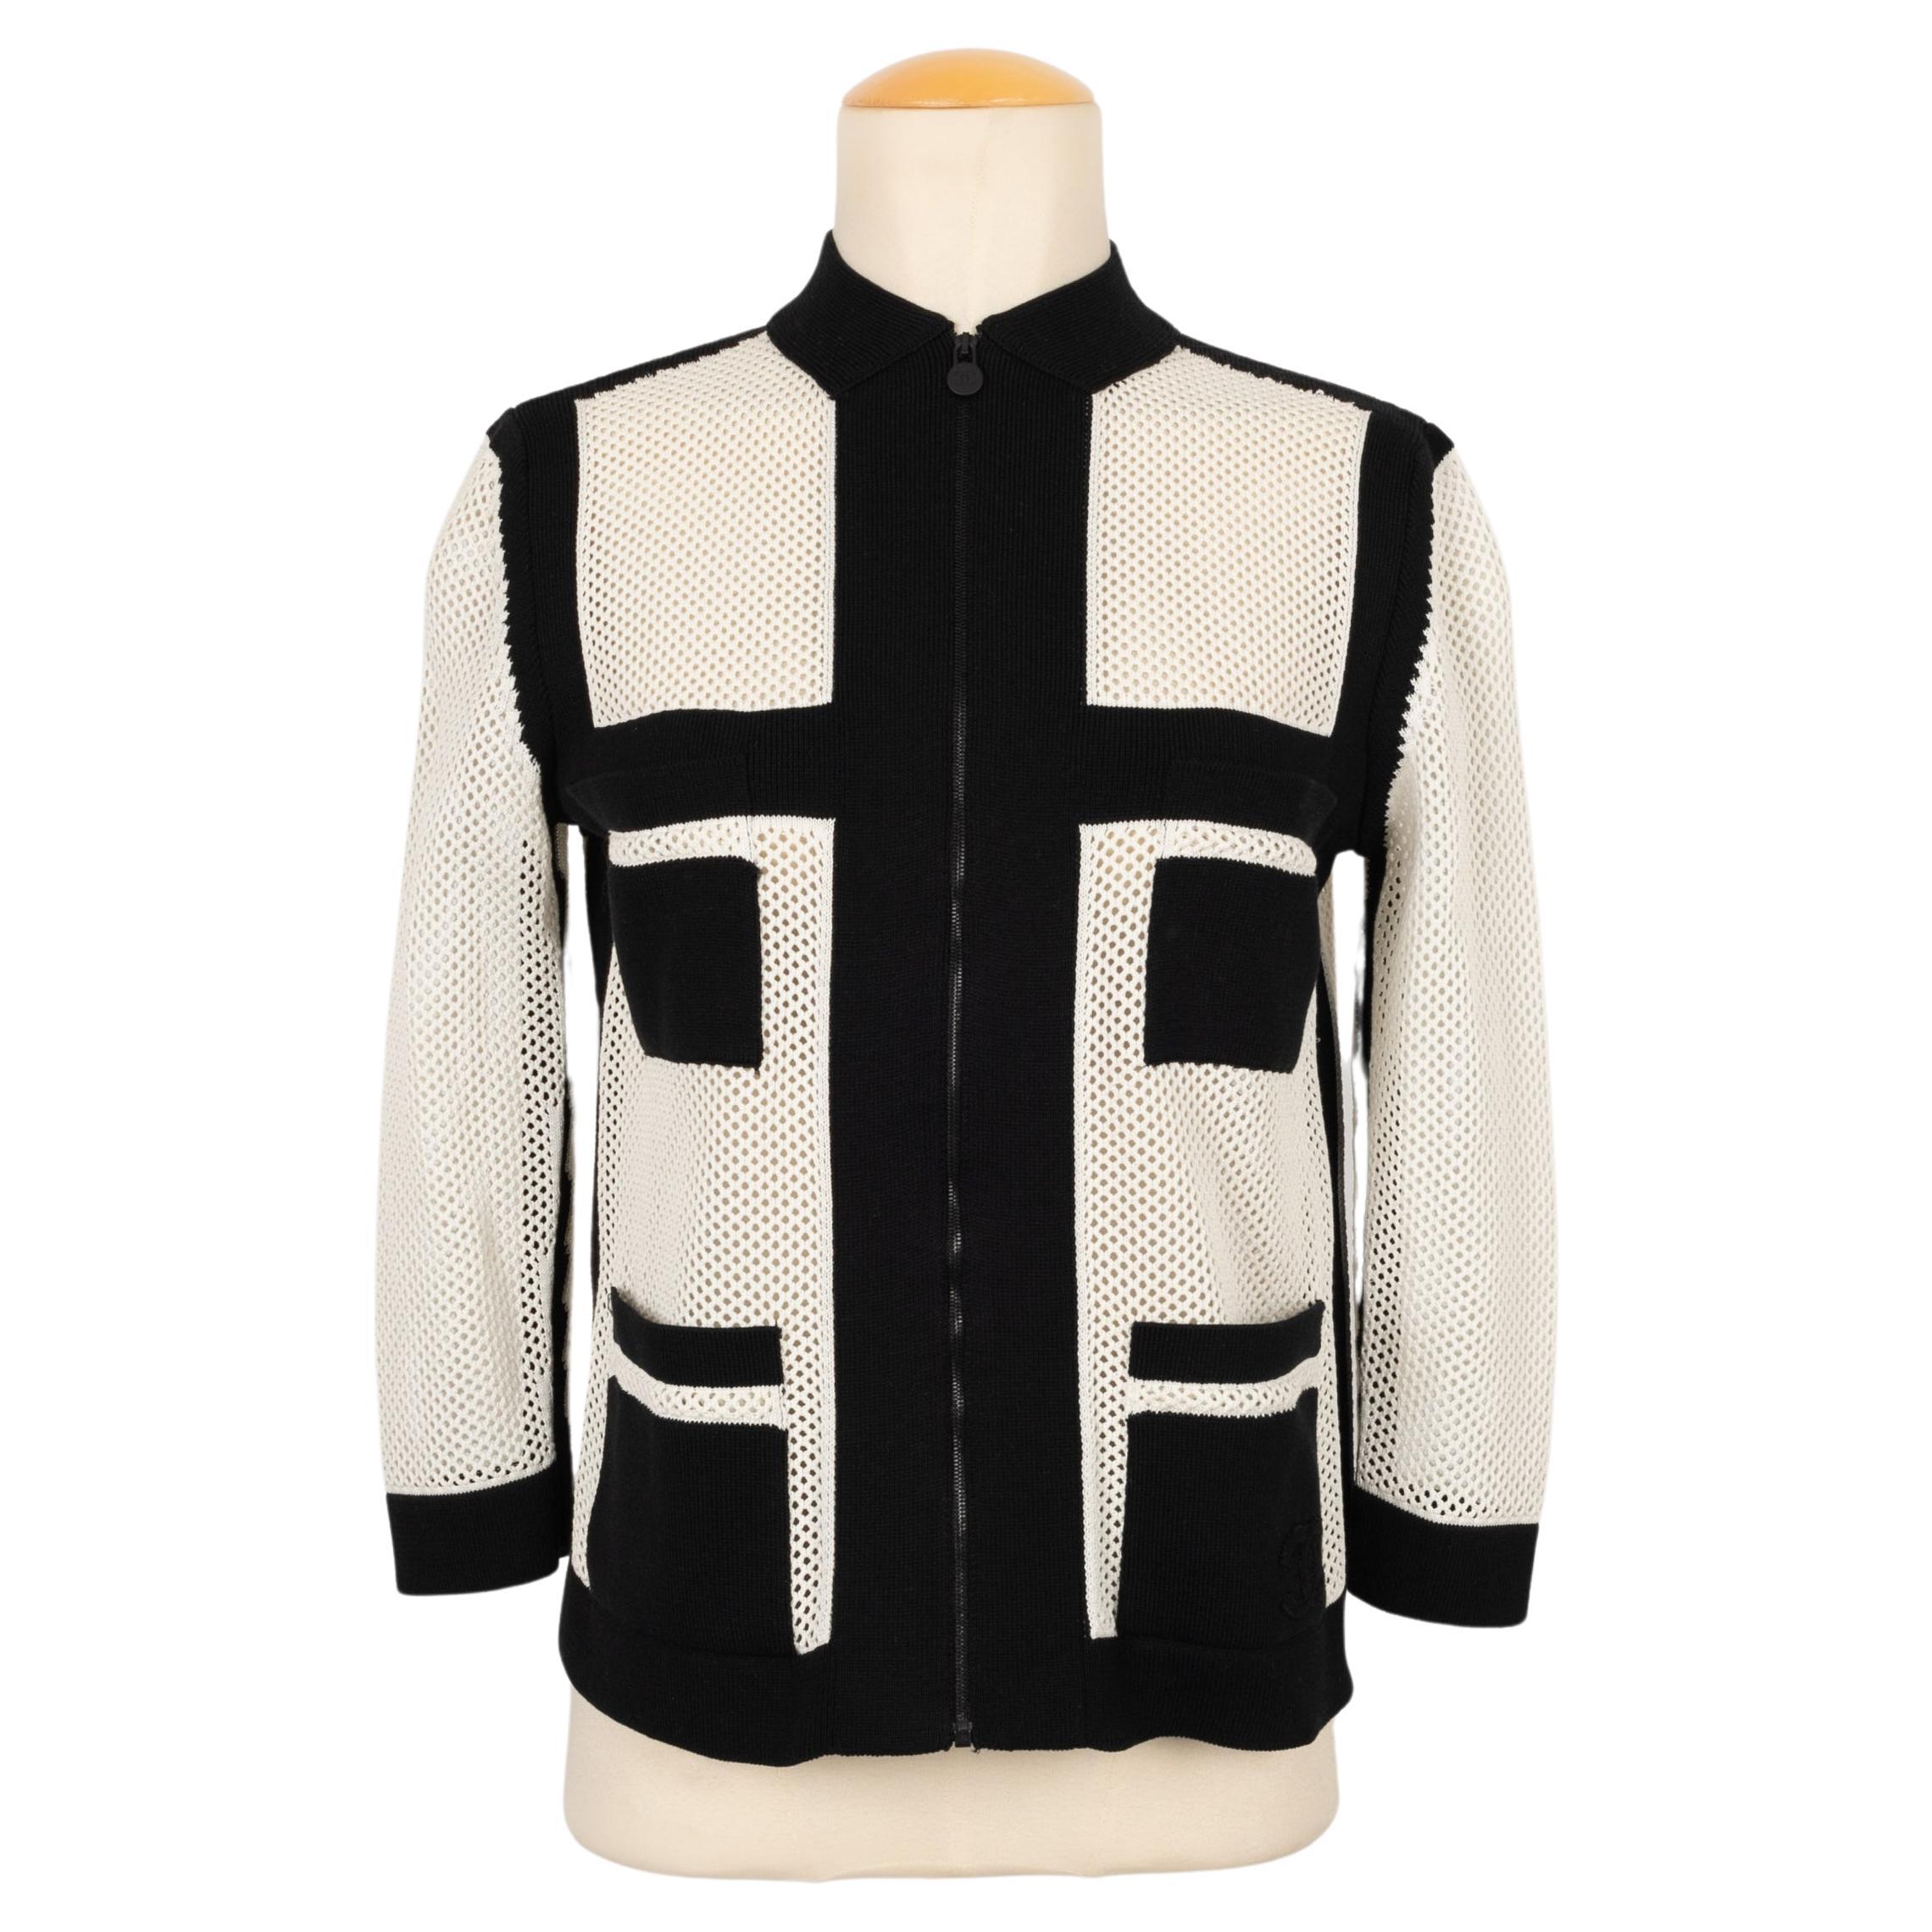 Chanel Jacket-Style Zipped Top in Black and White Mesh For Sale